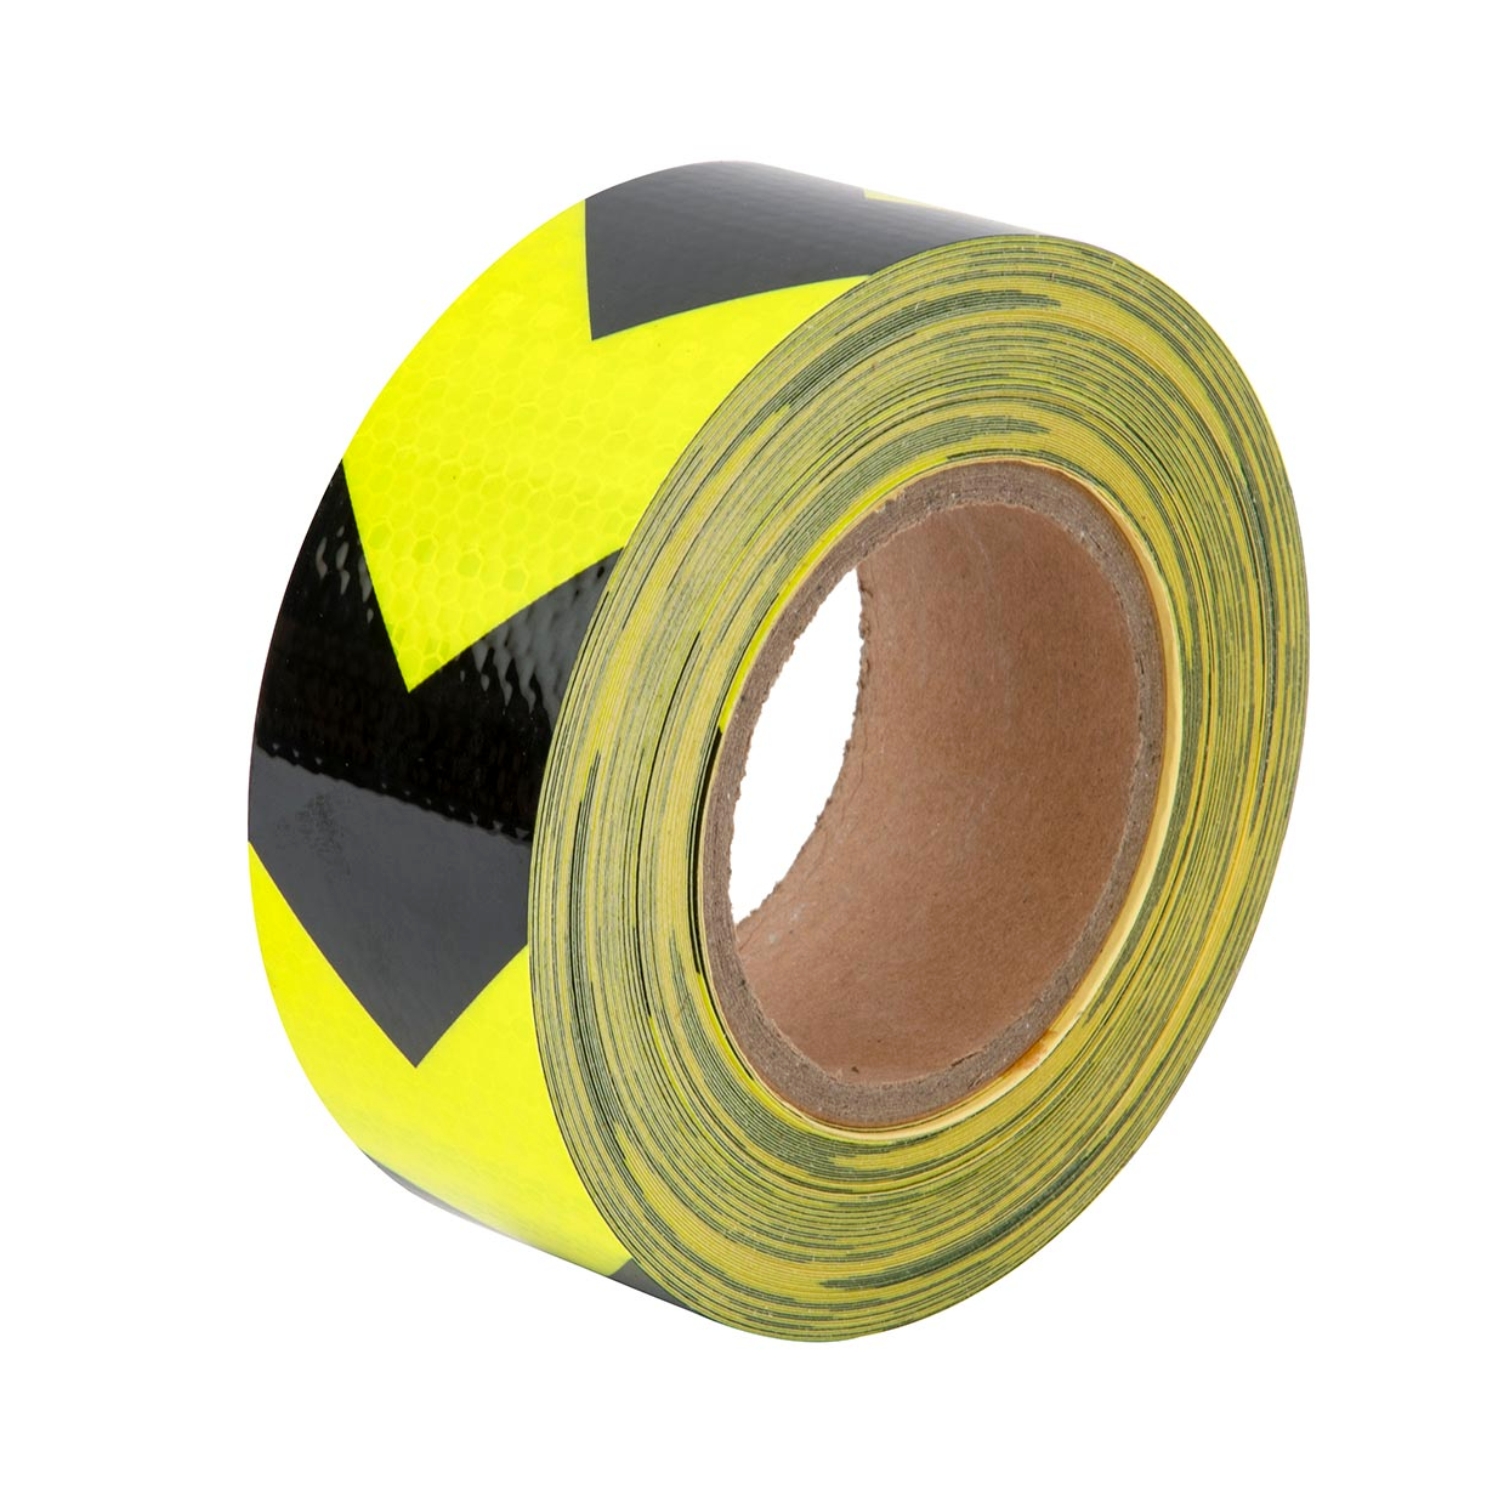 High Visibility Waterproof Adhesive Arrow Reflective Safety Tape Red & Yellow